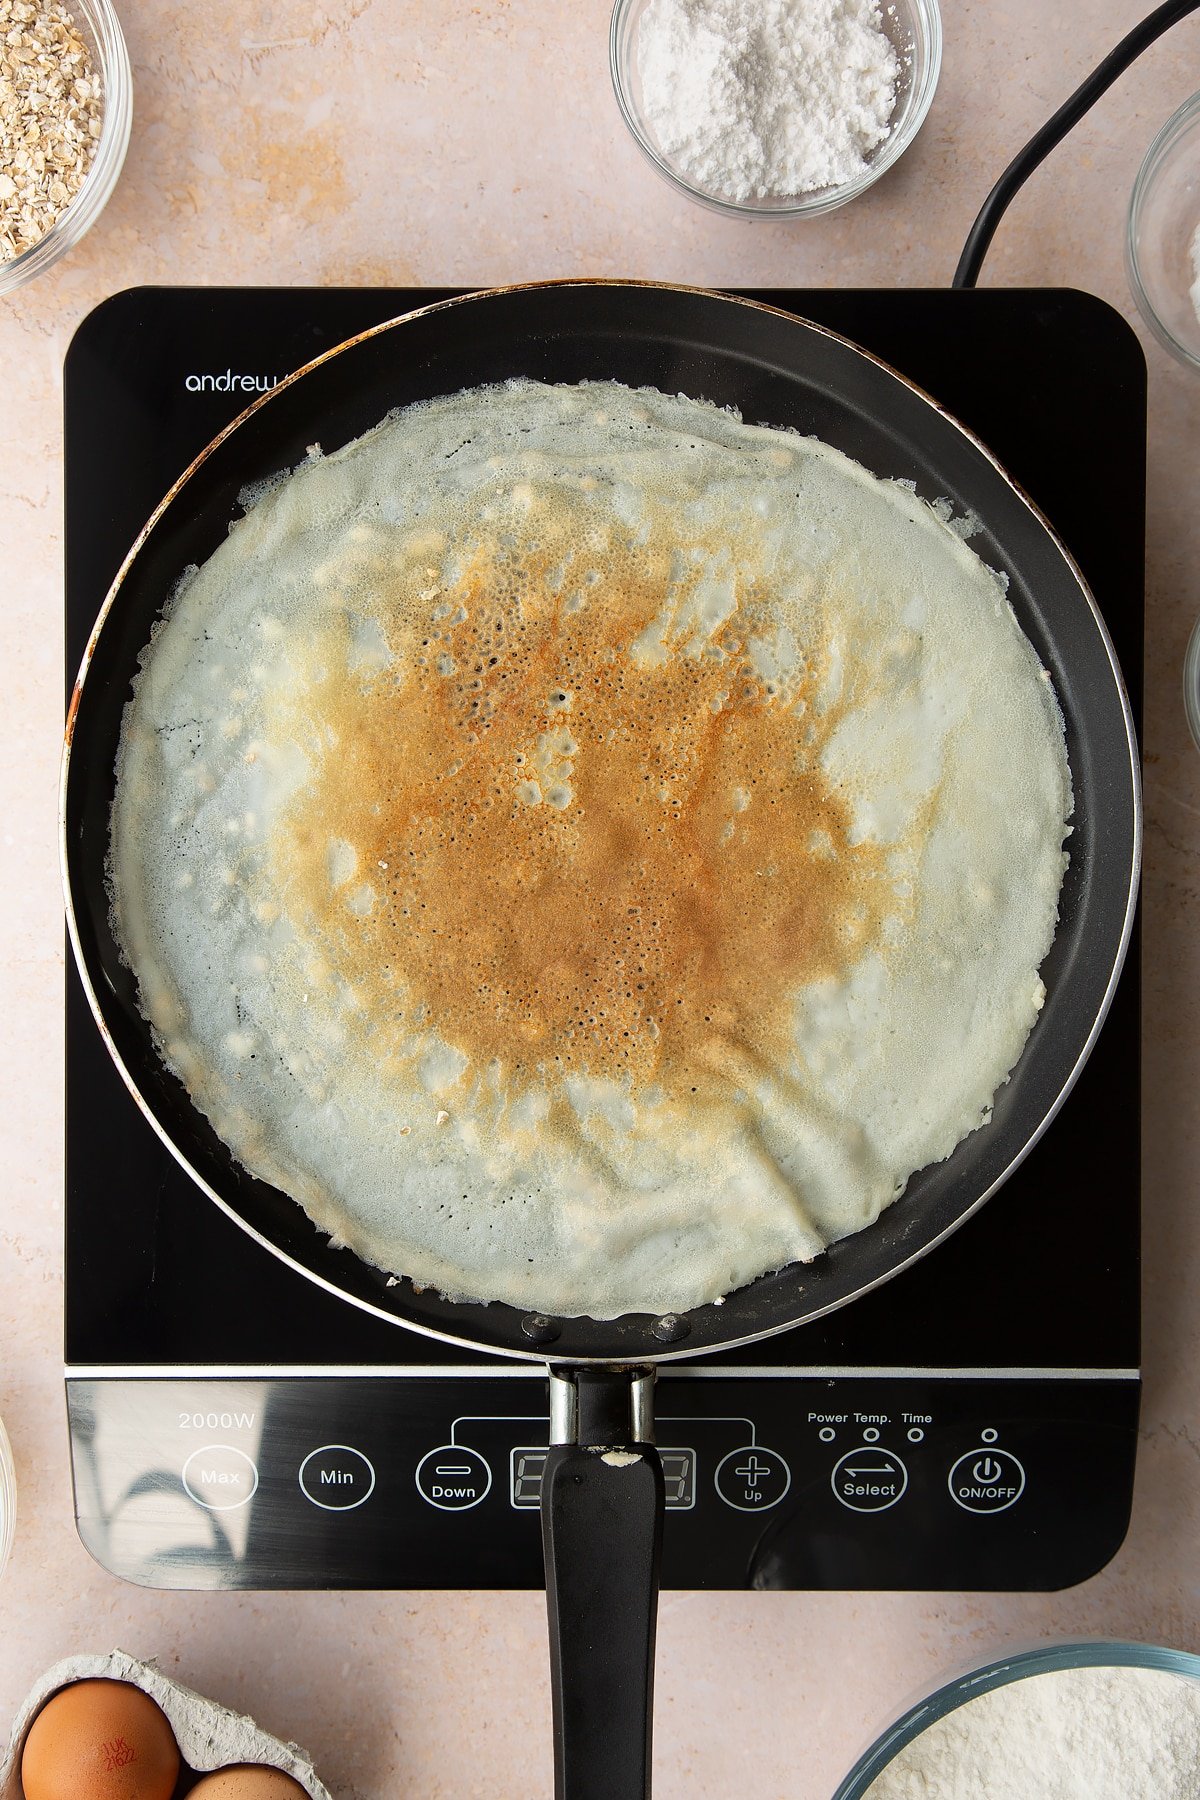 A crepe flipped over in a crepe pan. Ingredients to make gluten free crepes surround the bowl.